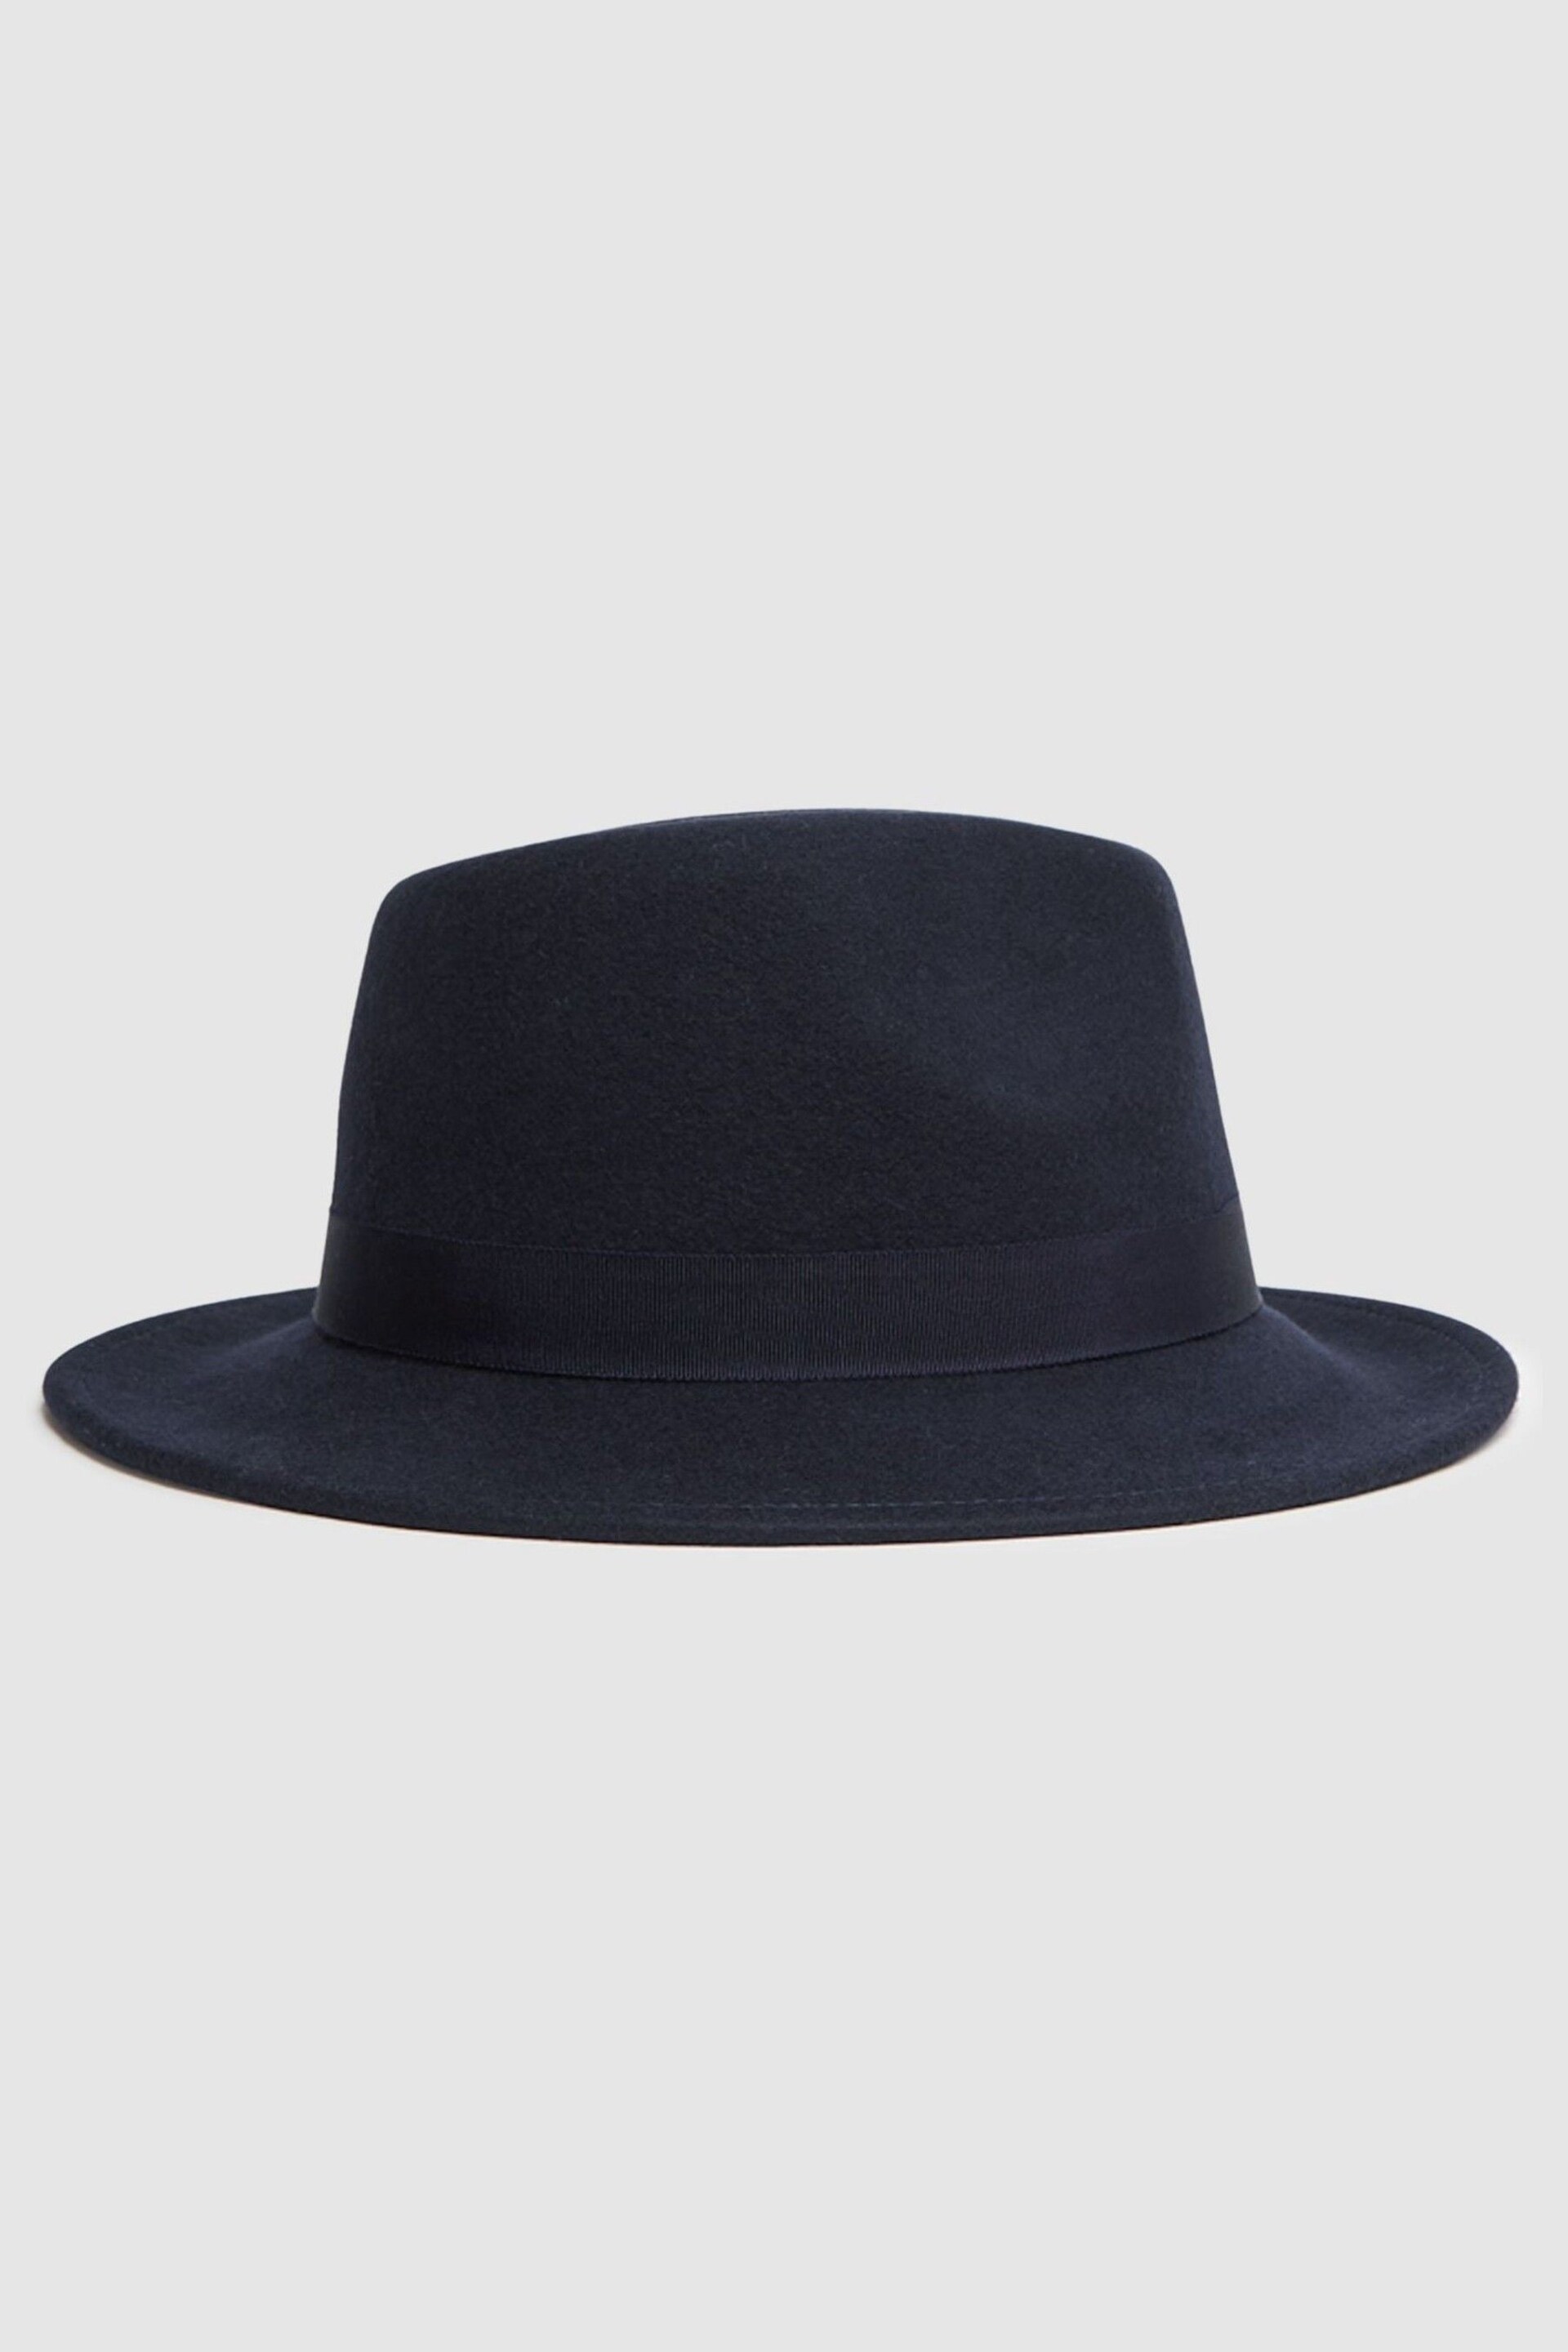 Reiss Navy Ally Wool Fedora Hat - Image 1 of 5